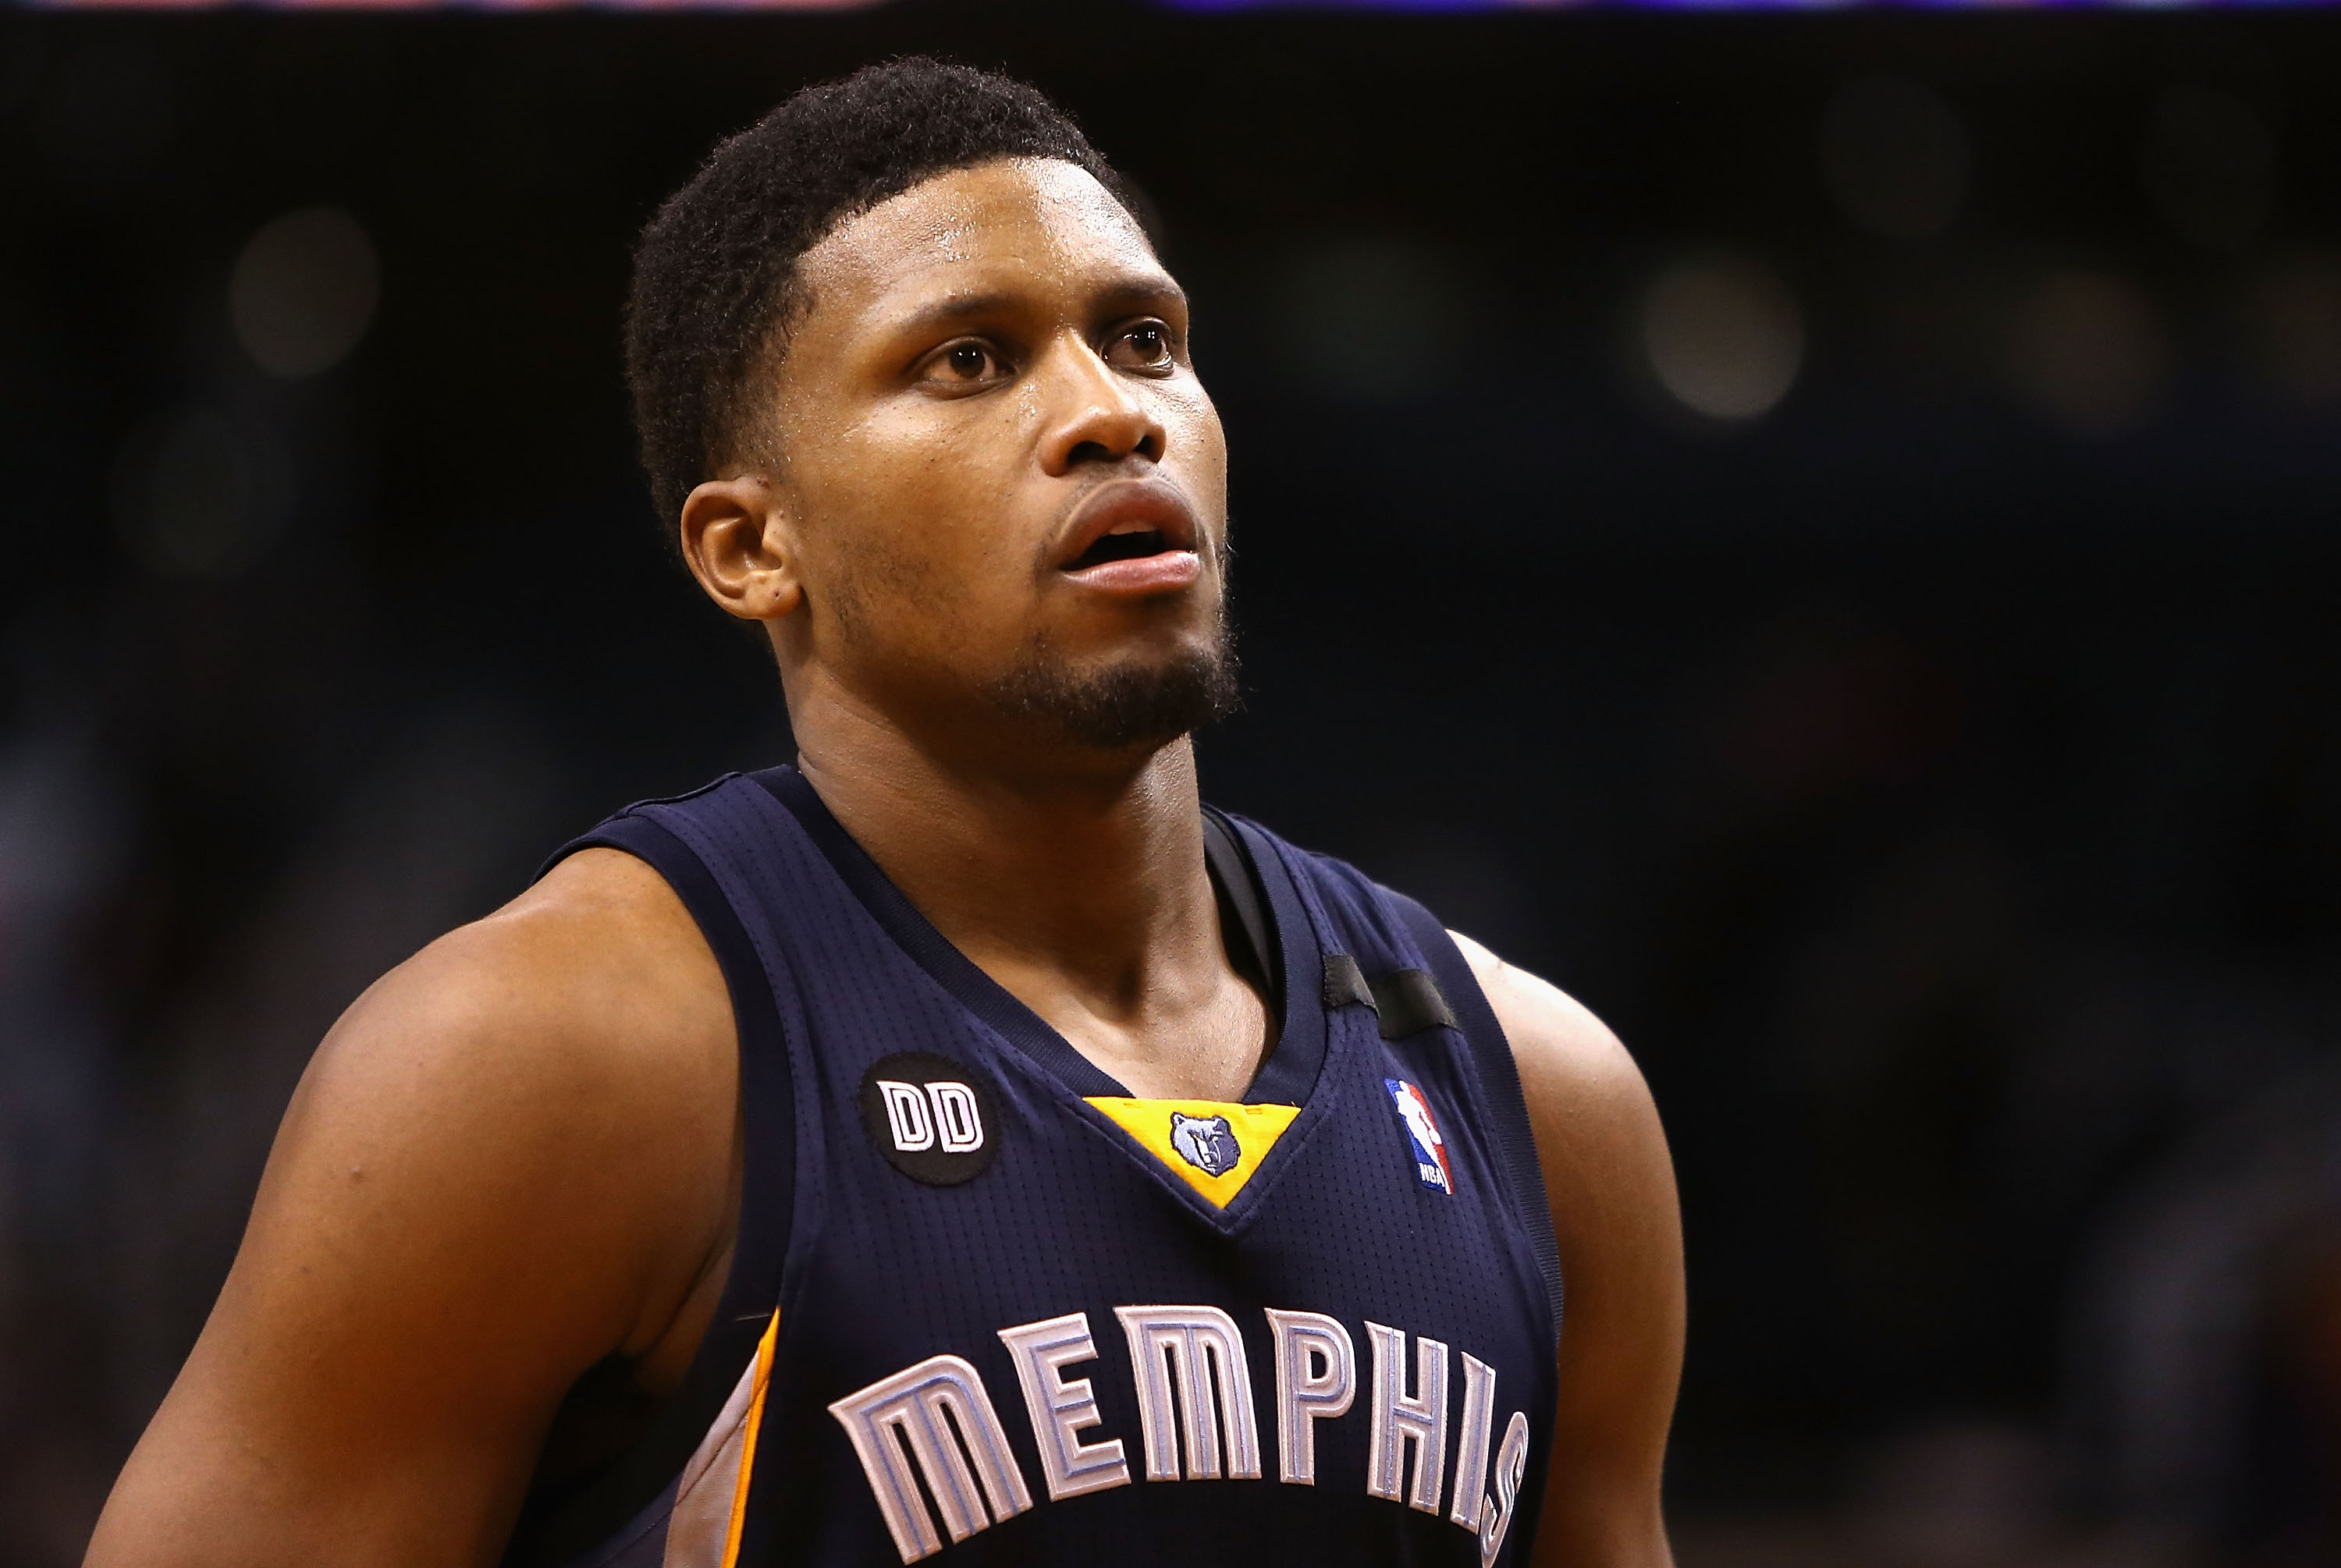 Rudy Gay traded to Toronto Raptors as Memphis Grizzlies continue makeover - CBS News